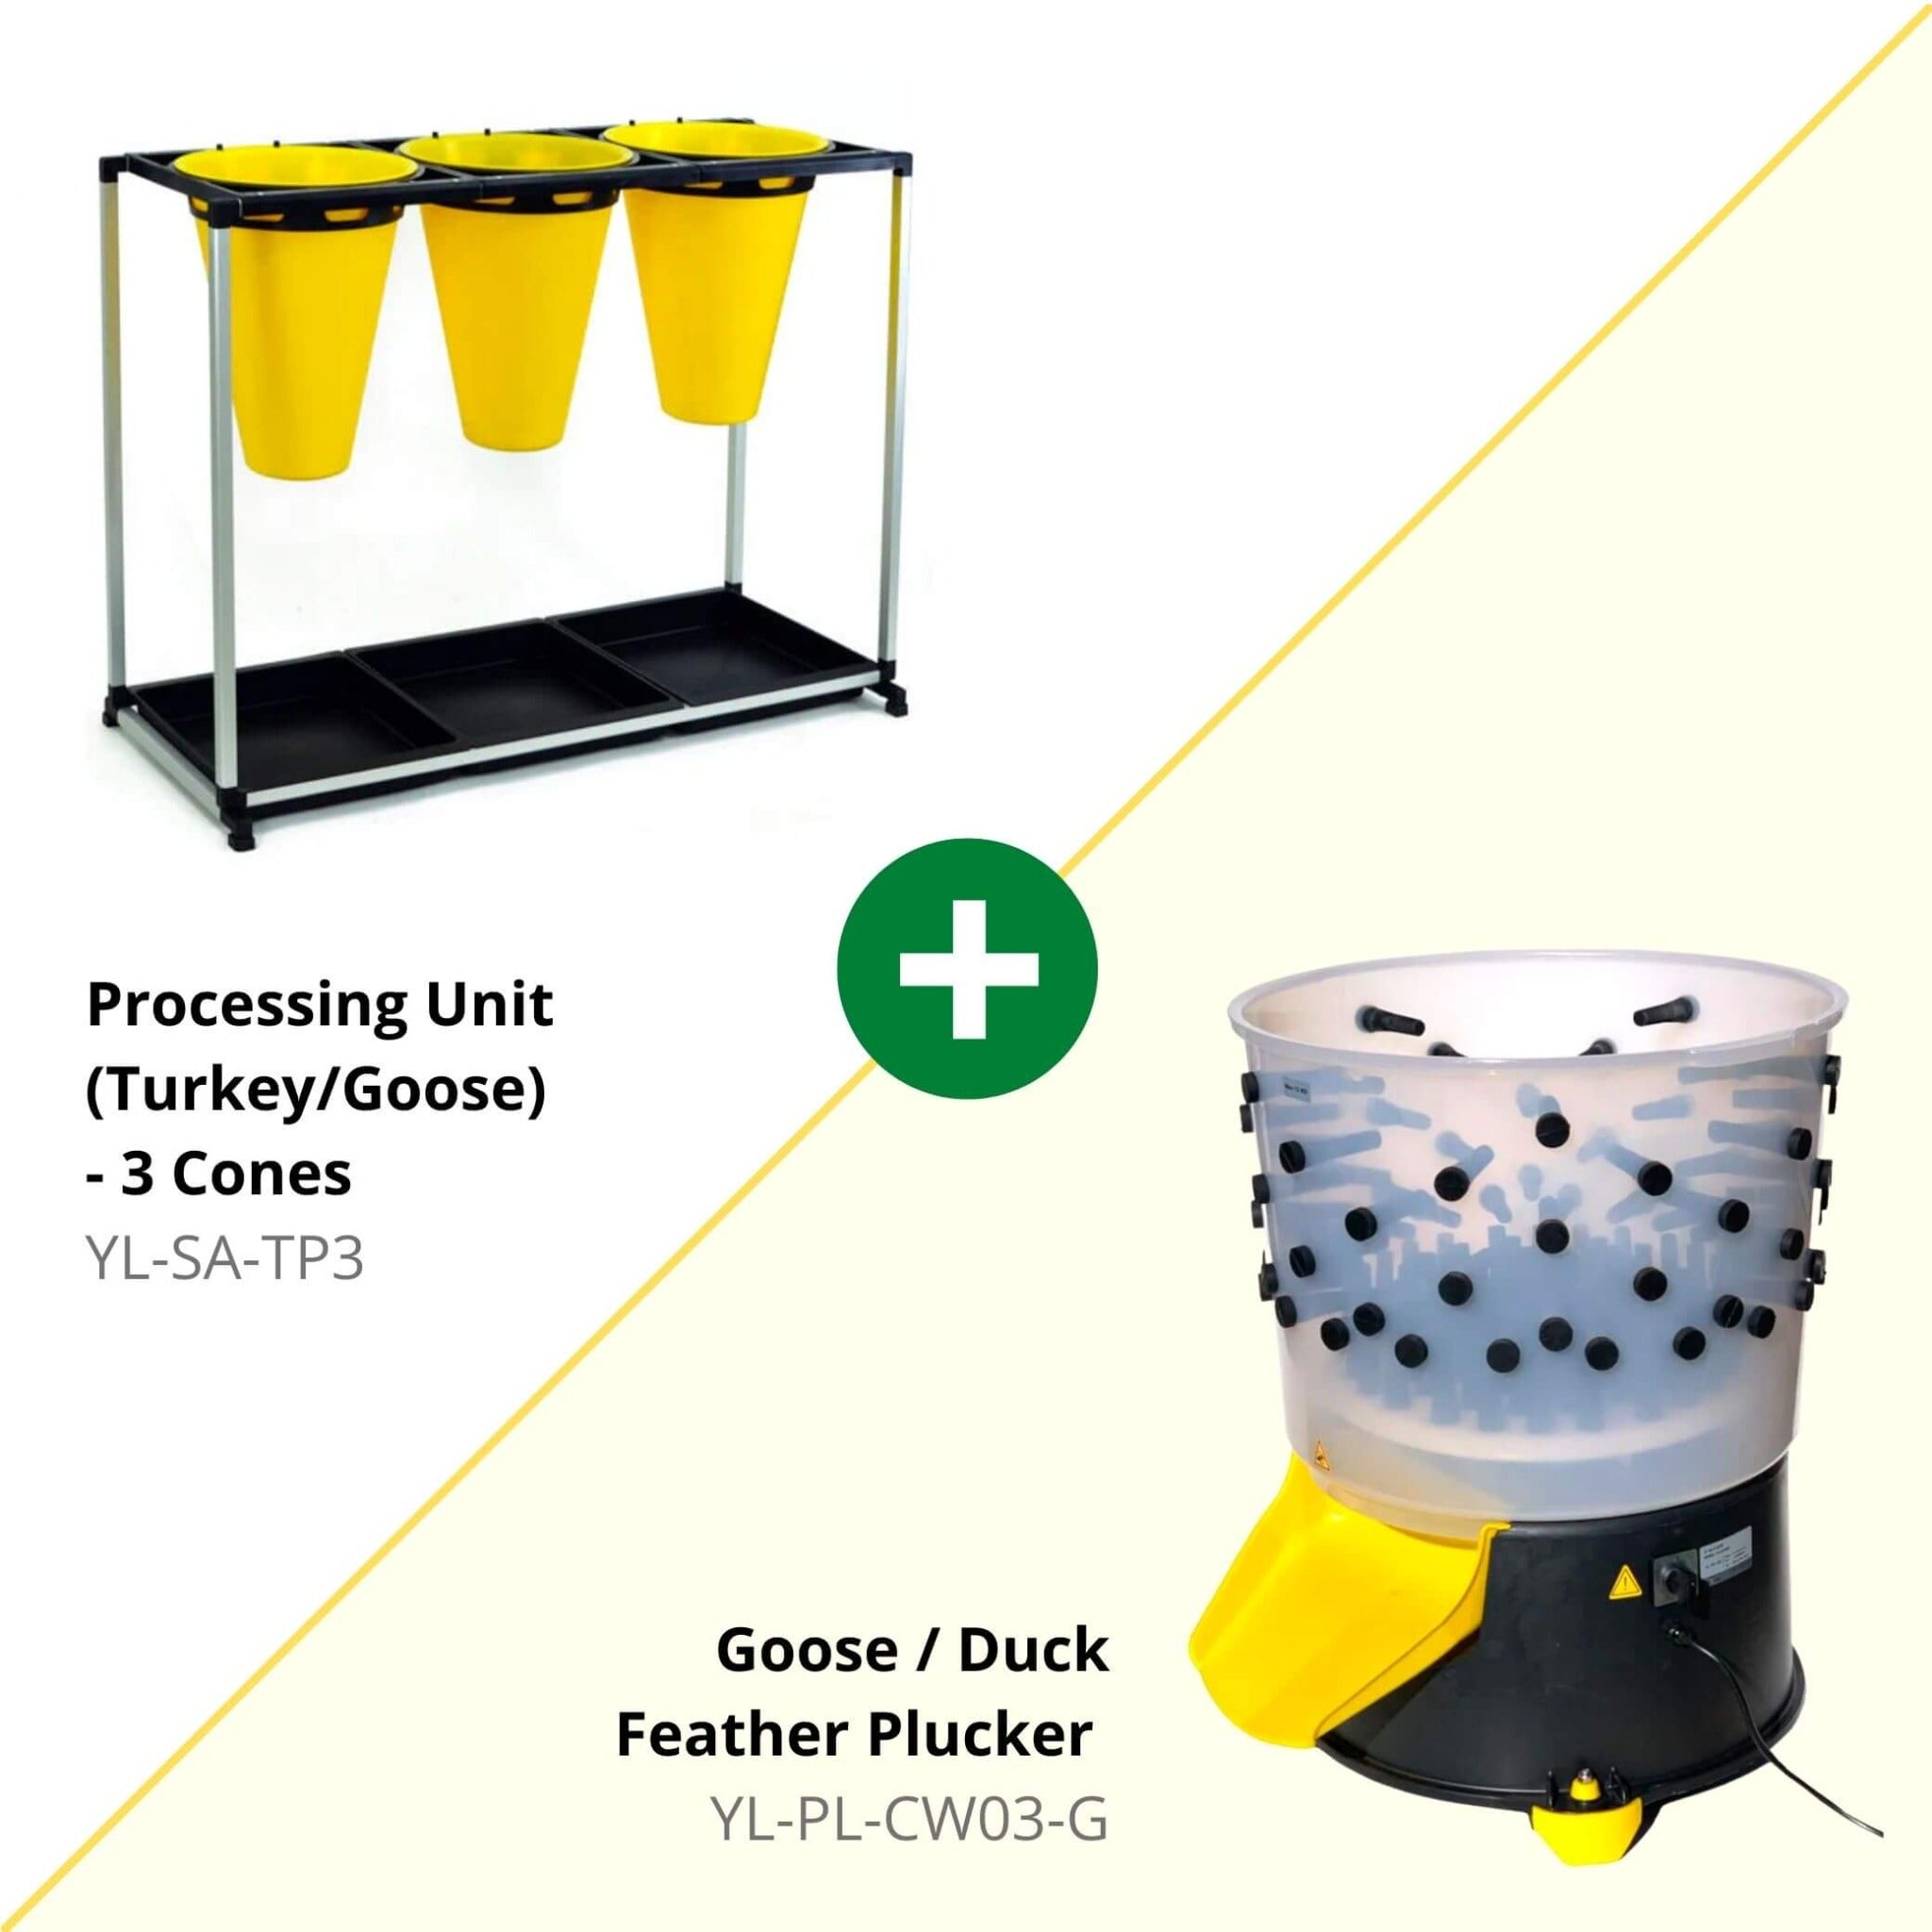 Hatching Time Cimuka. Image shows that kit comes with Processing cones and Feather plucker for geese/ducks.